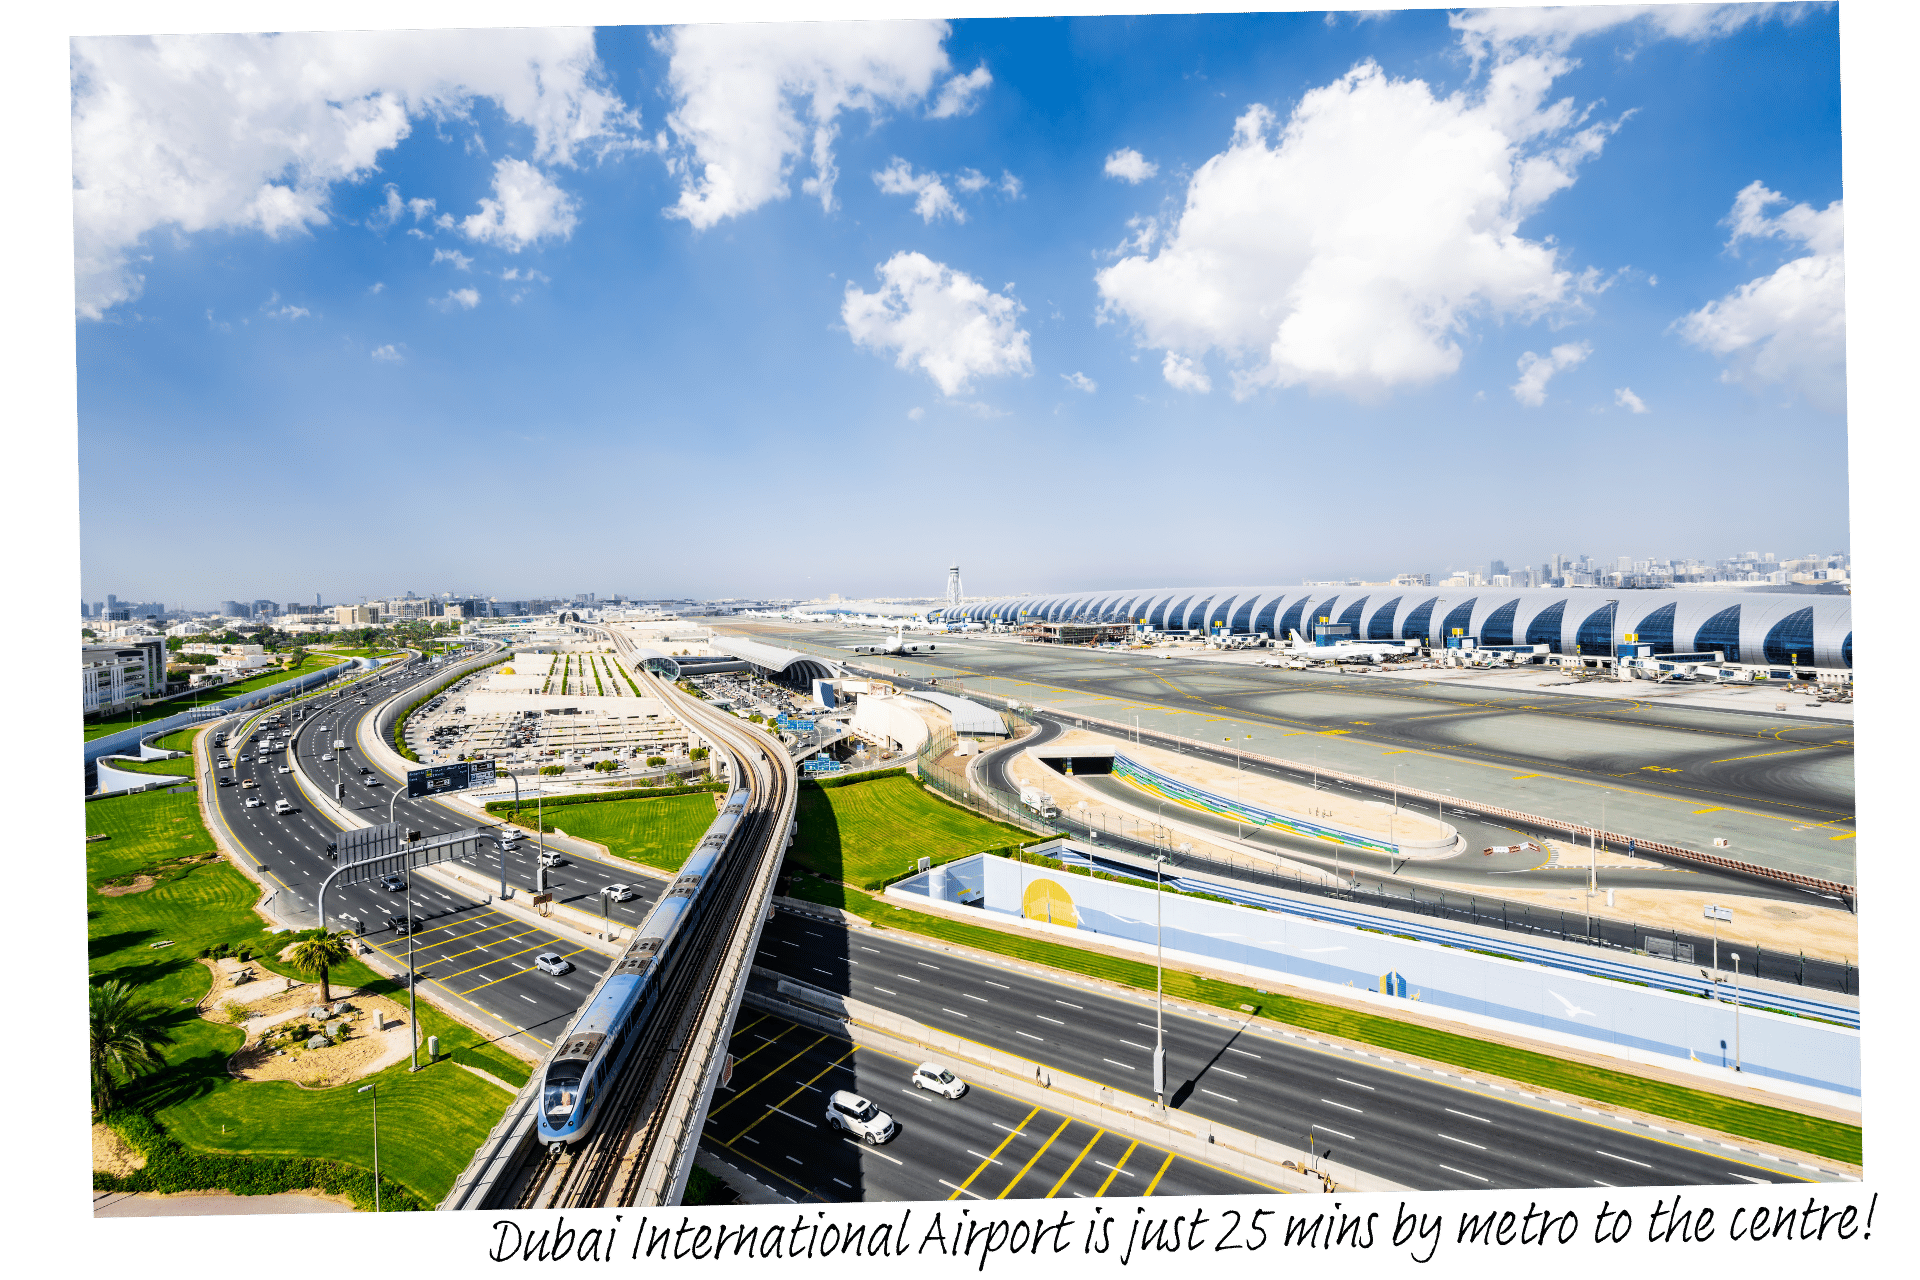 Dubai International Airport is one of the world's best airports for a layover